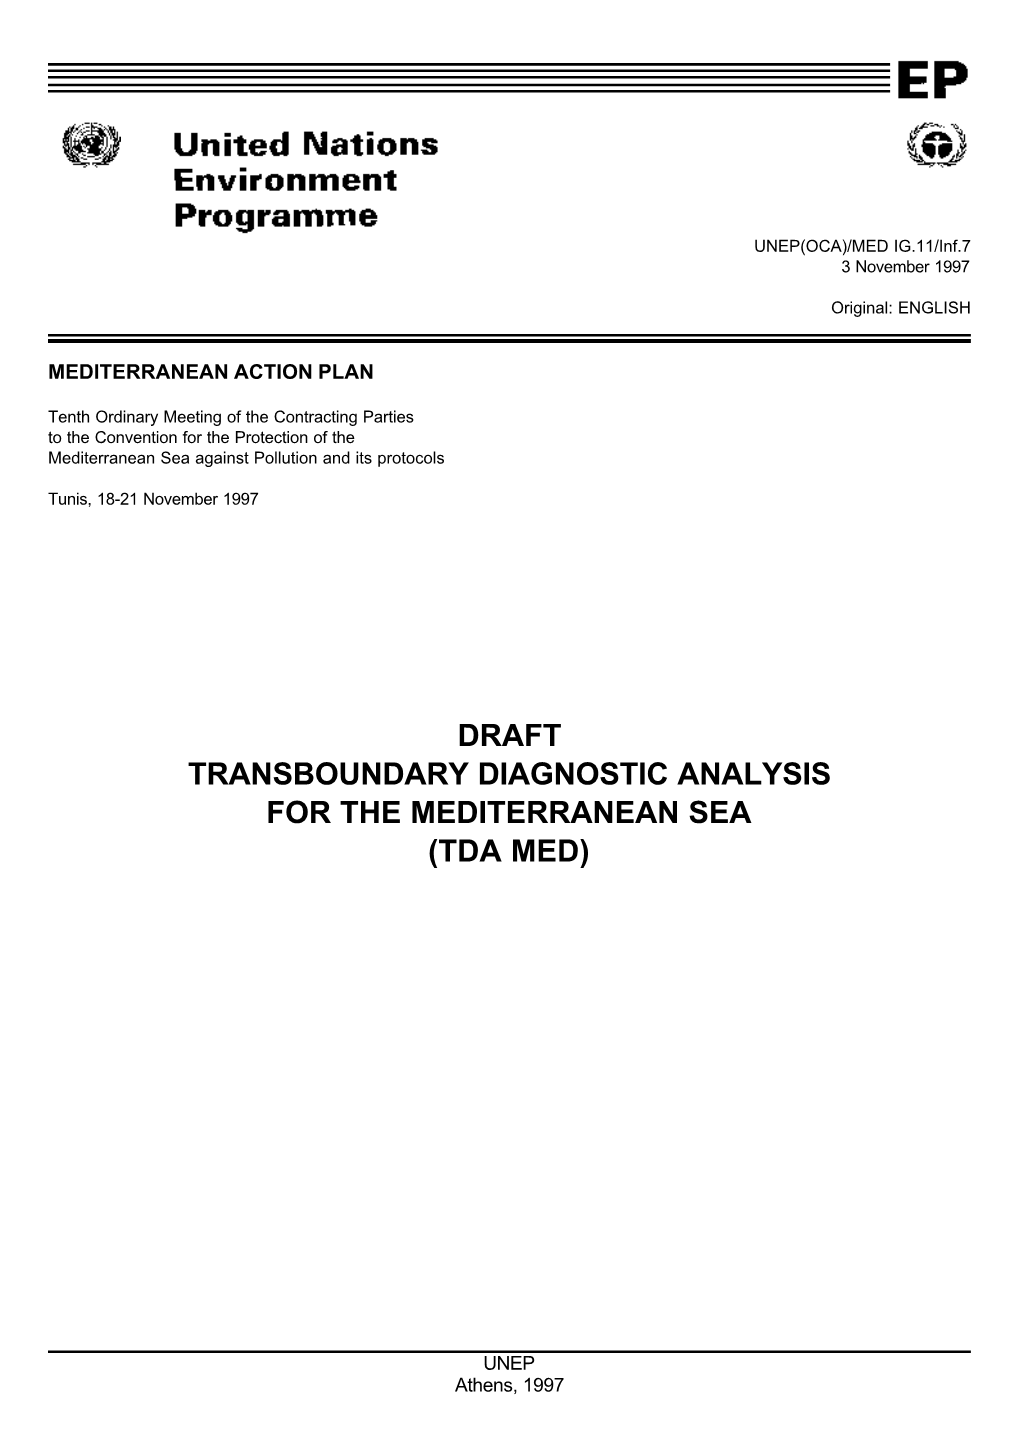 Draft Transboundary Diagnostic Analysis for the Mediterranean Sea (Tda Med)